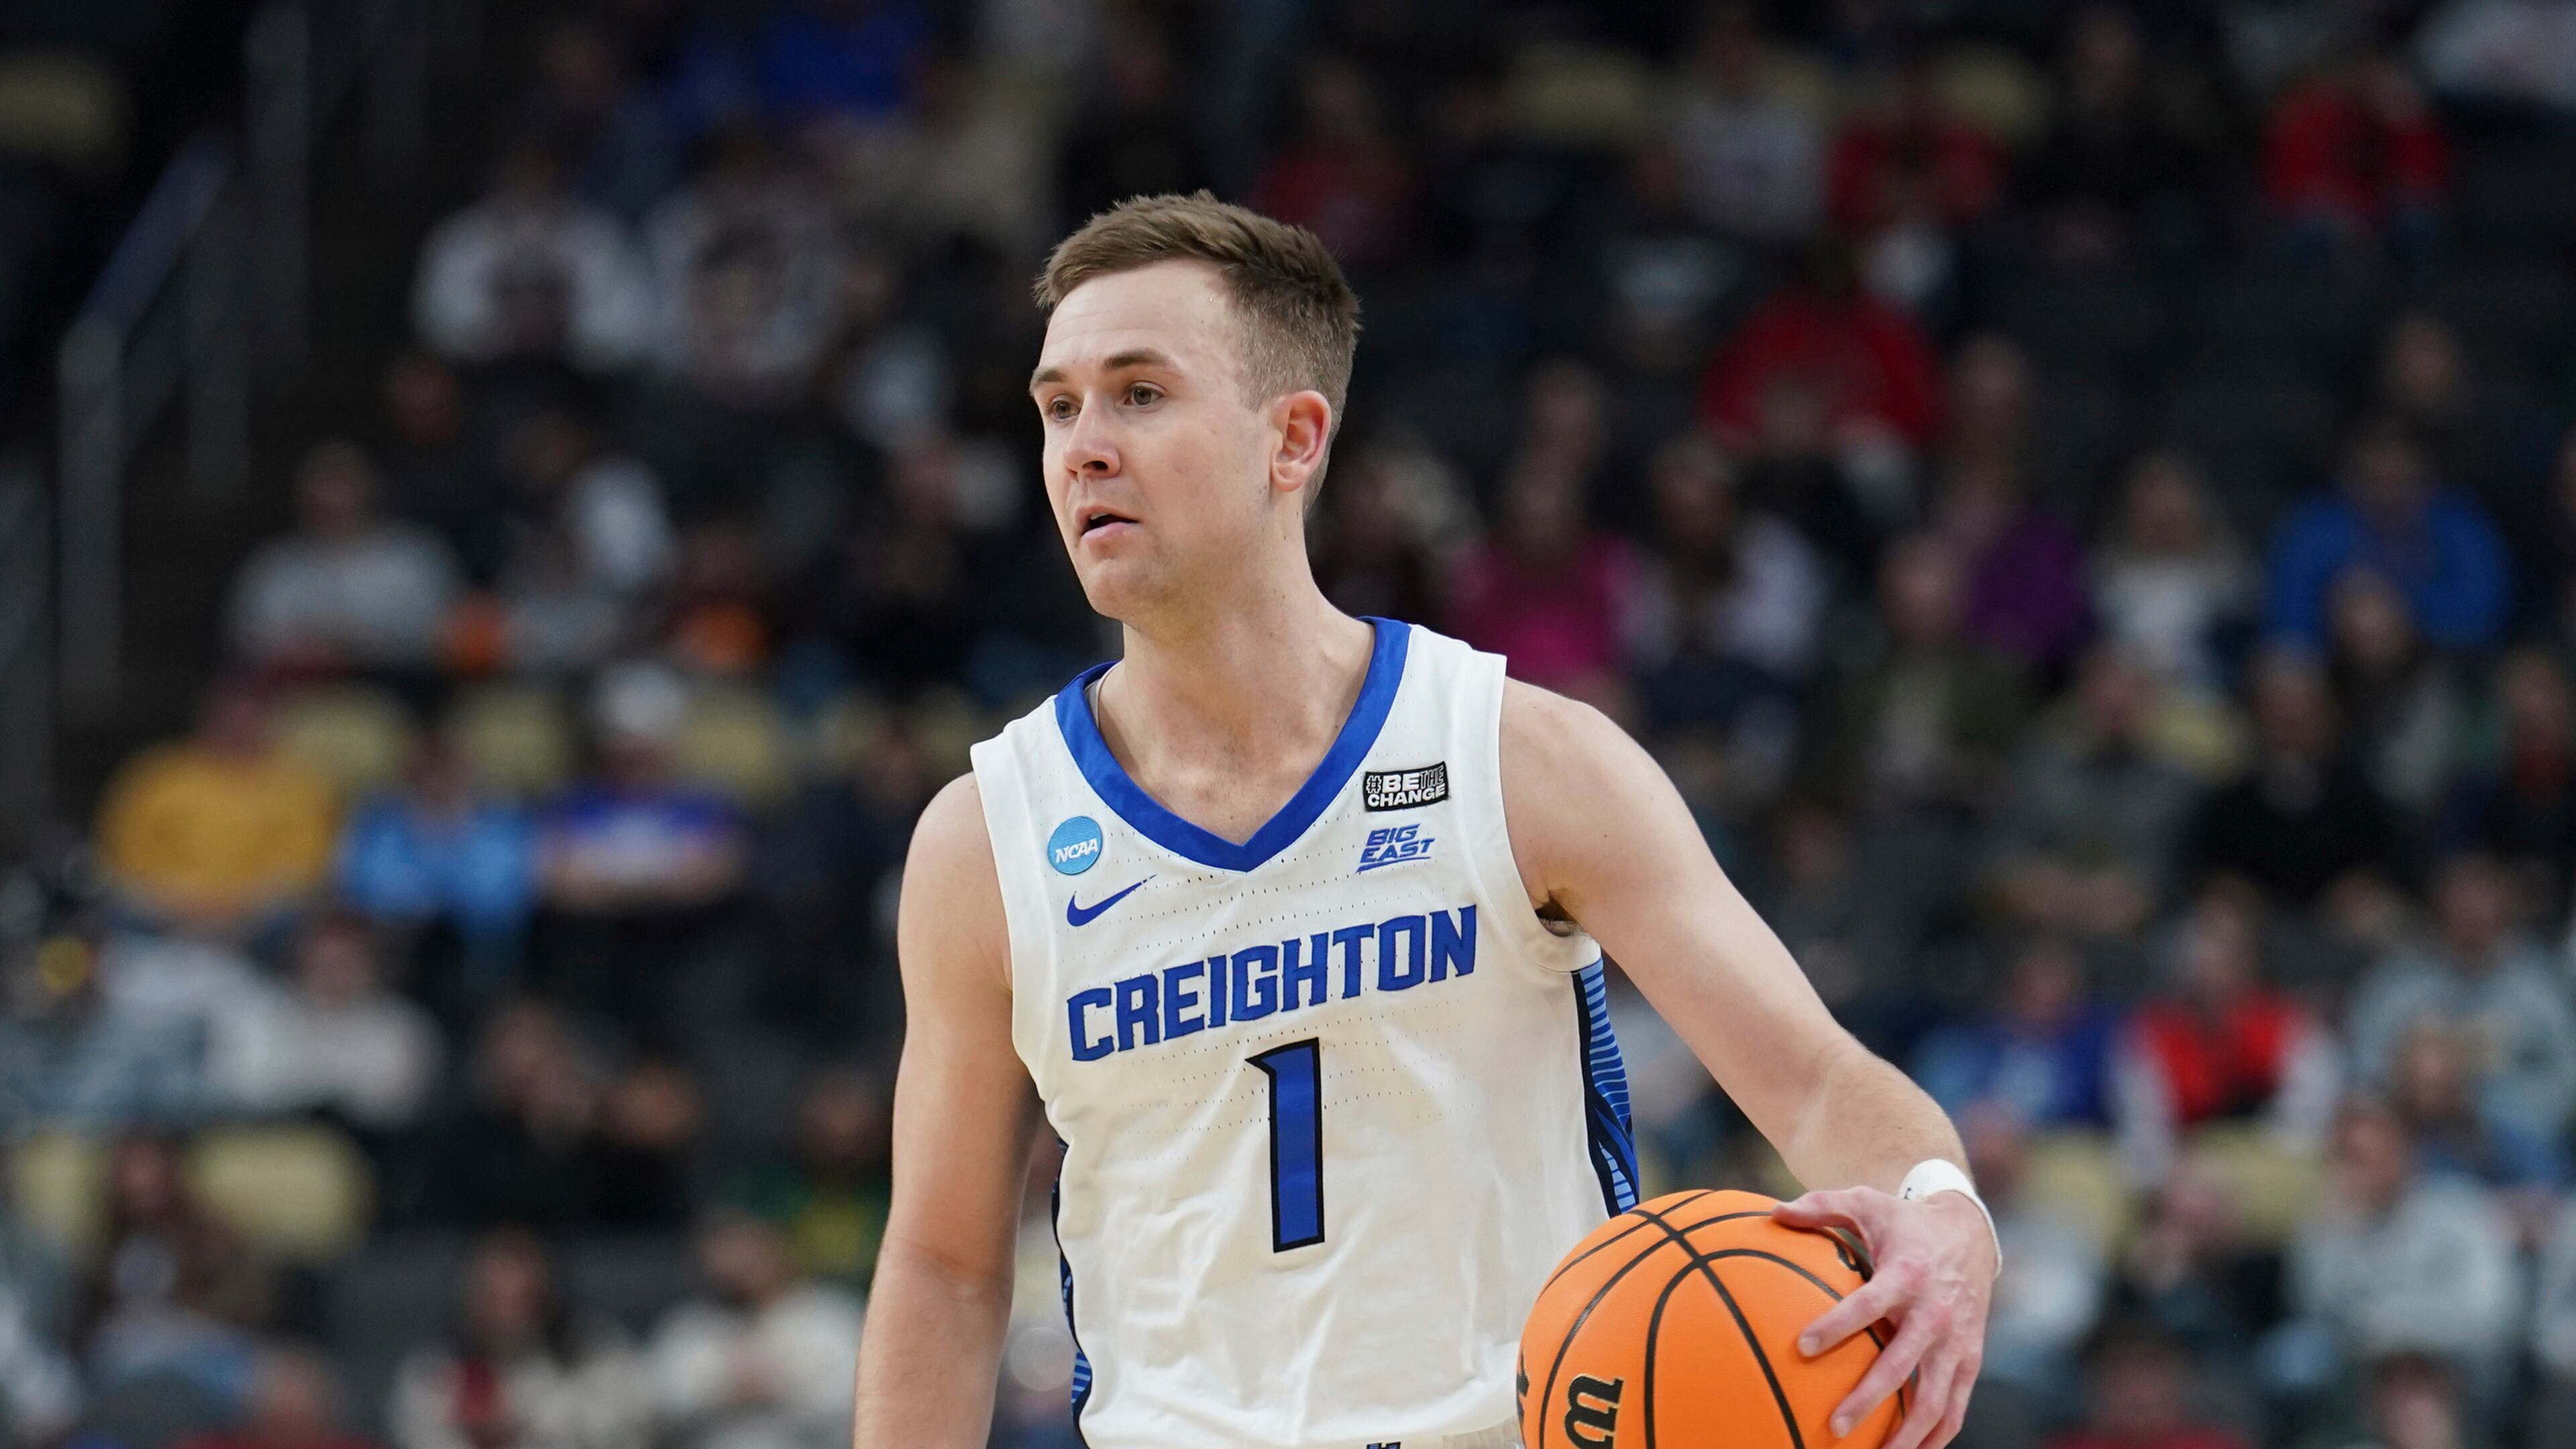 Creighton outlasts Oregon 86-73 in double OT thriller to earn spot in Sweet 16 of March Madness